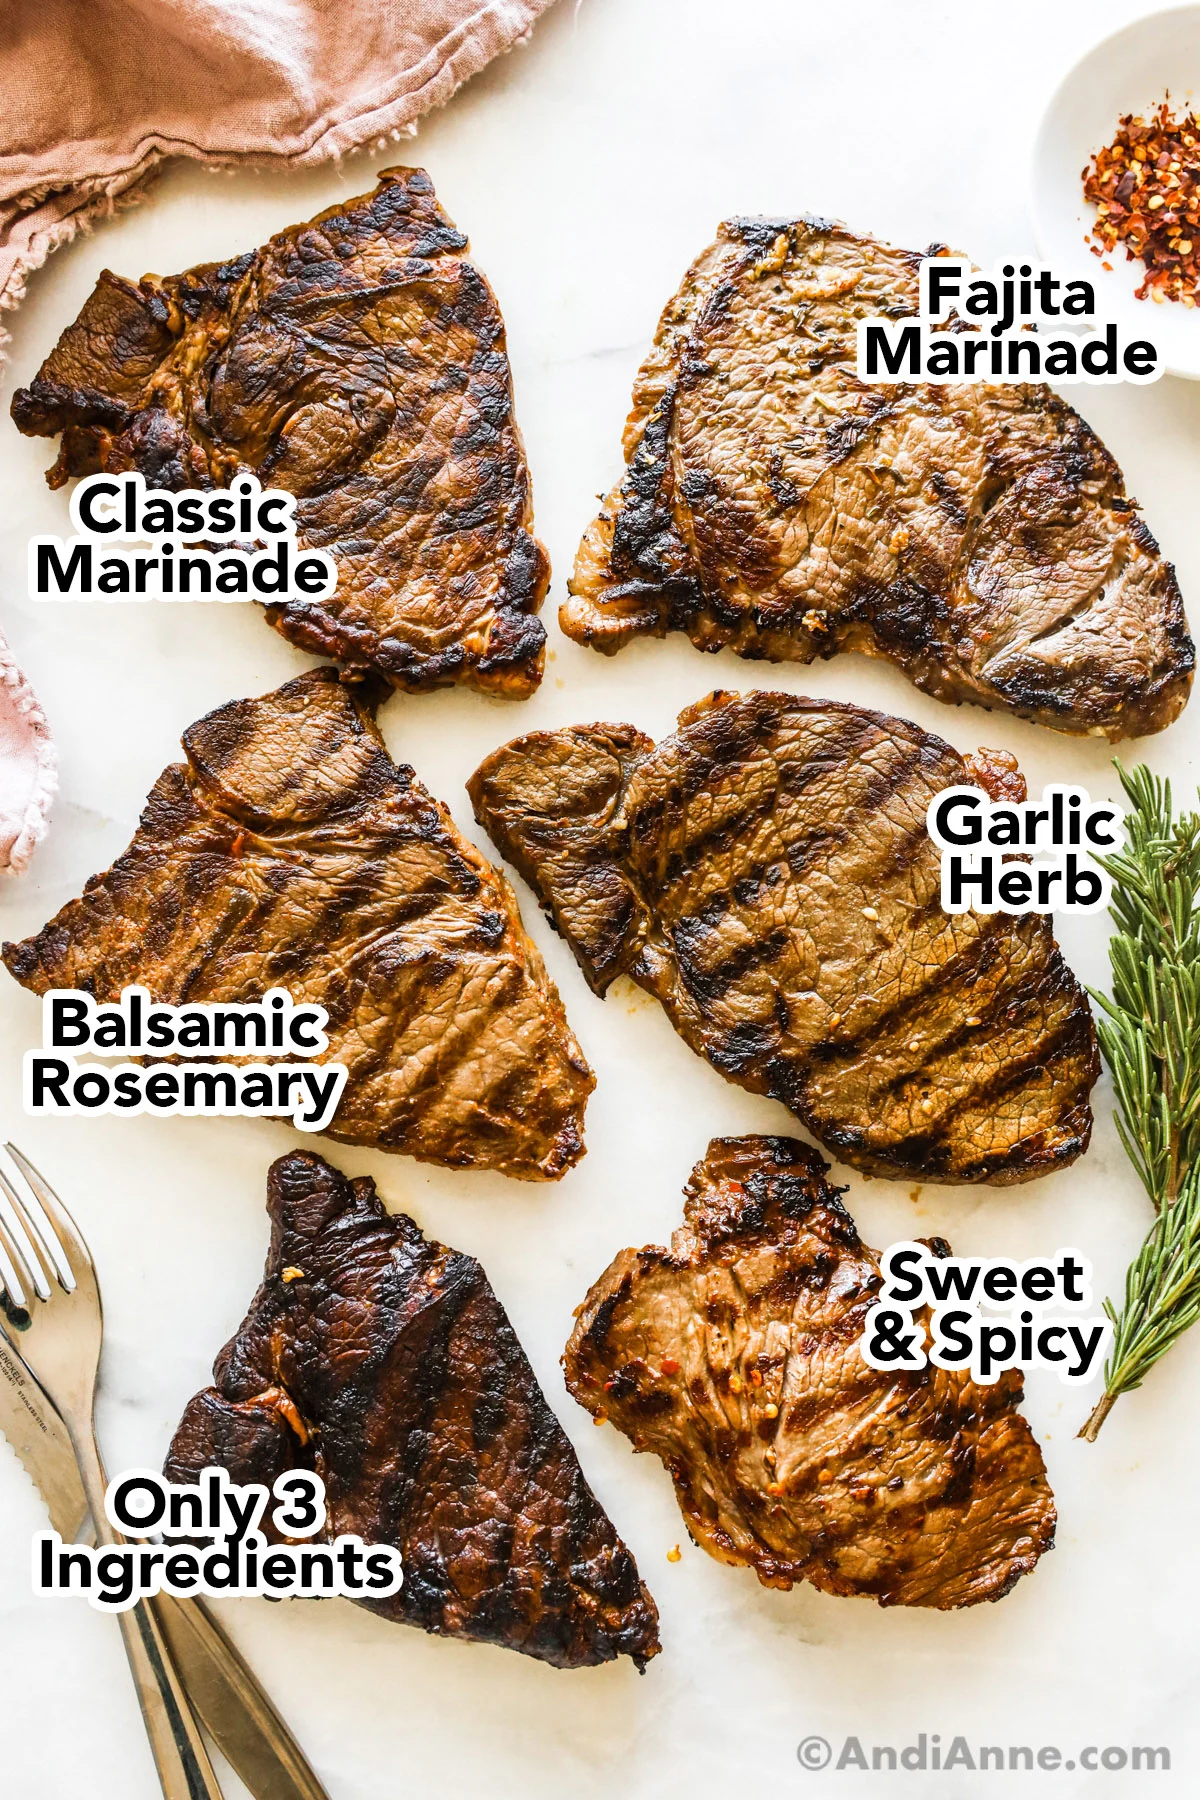 Six cooked marinated steaks with grill marks. Marinade flavors include classic marinade, fajita marinade, balsamic rosemary, garlic herb, 3 ingredients, sweet and spicy.